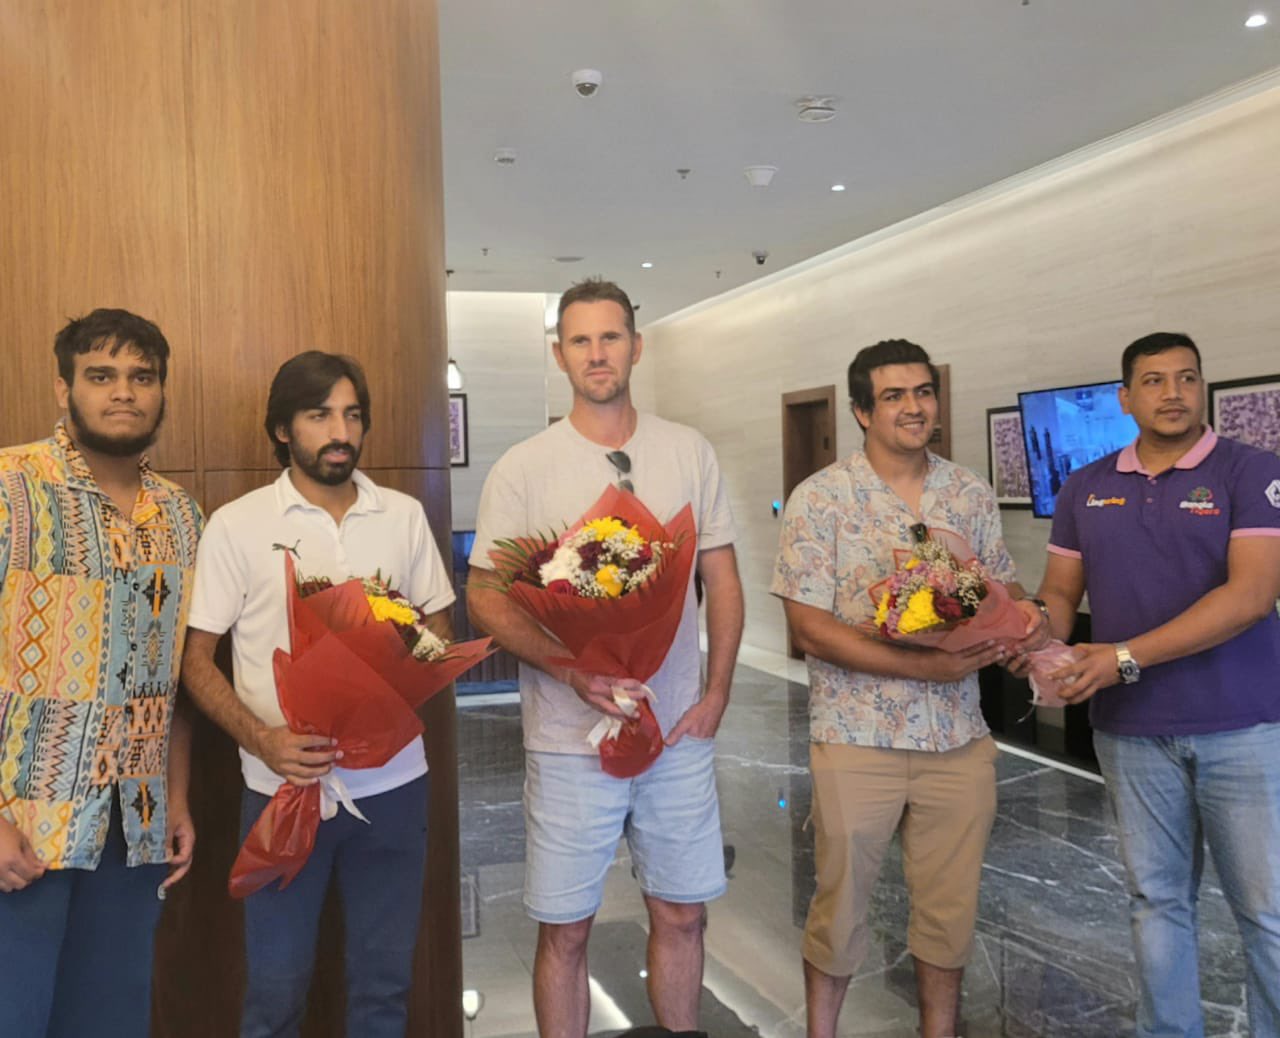 Shaun Tait resigns as Afghanistan's fast-bowling consultant with immediate effect